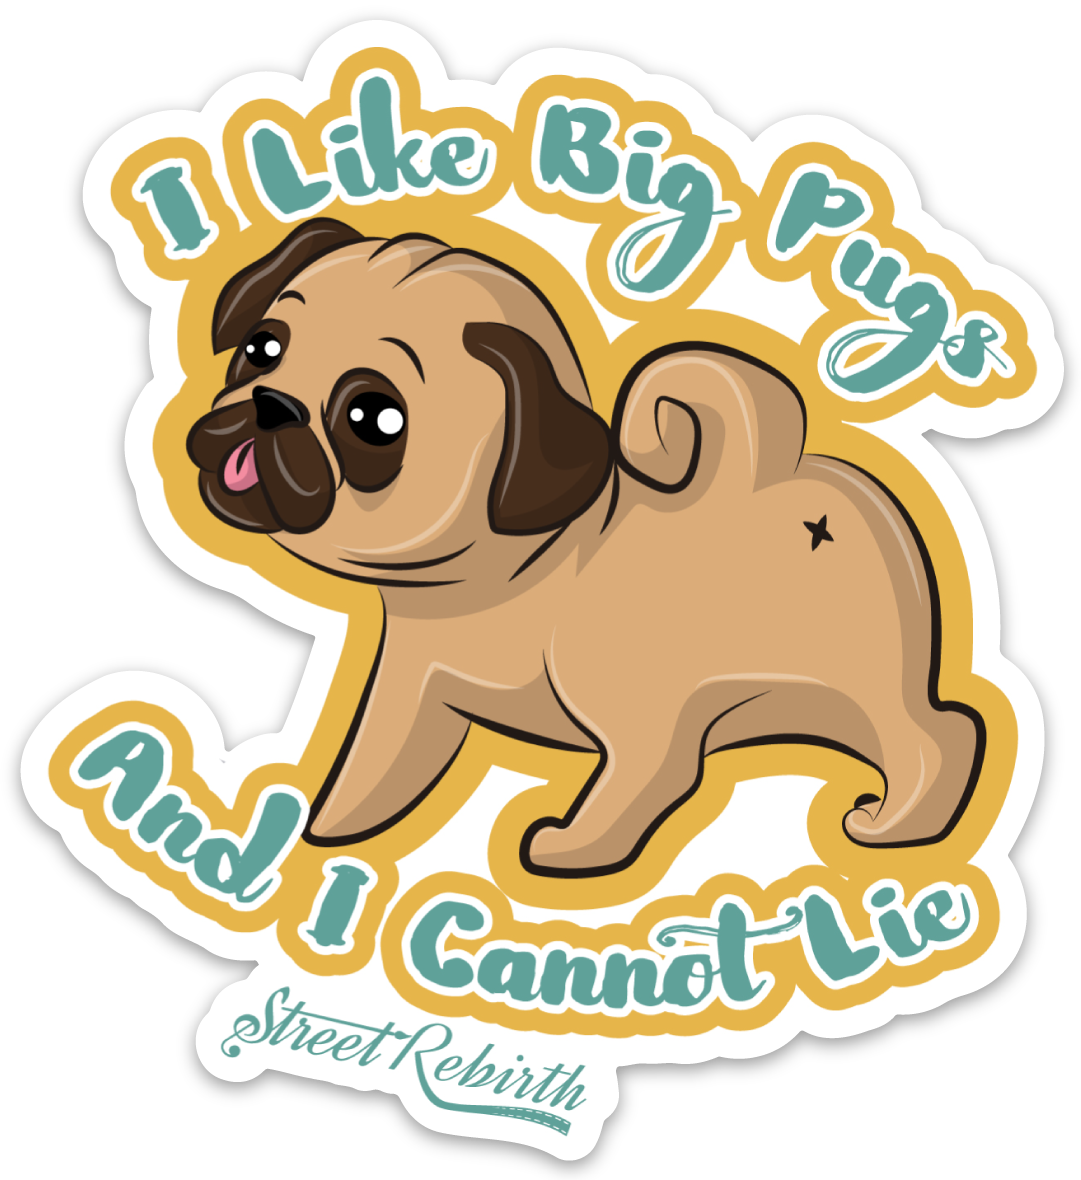 I Like Big Pugs and I Cannot Lie PUN STICKER – ONE 4 INCH WATER PROOF VINYL STICKER – FOR HYDRO FLASK, SKATEBOARD, LAPTOP, PLANNER, CAR, COLLECTING, GIFTING